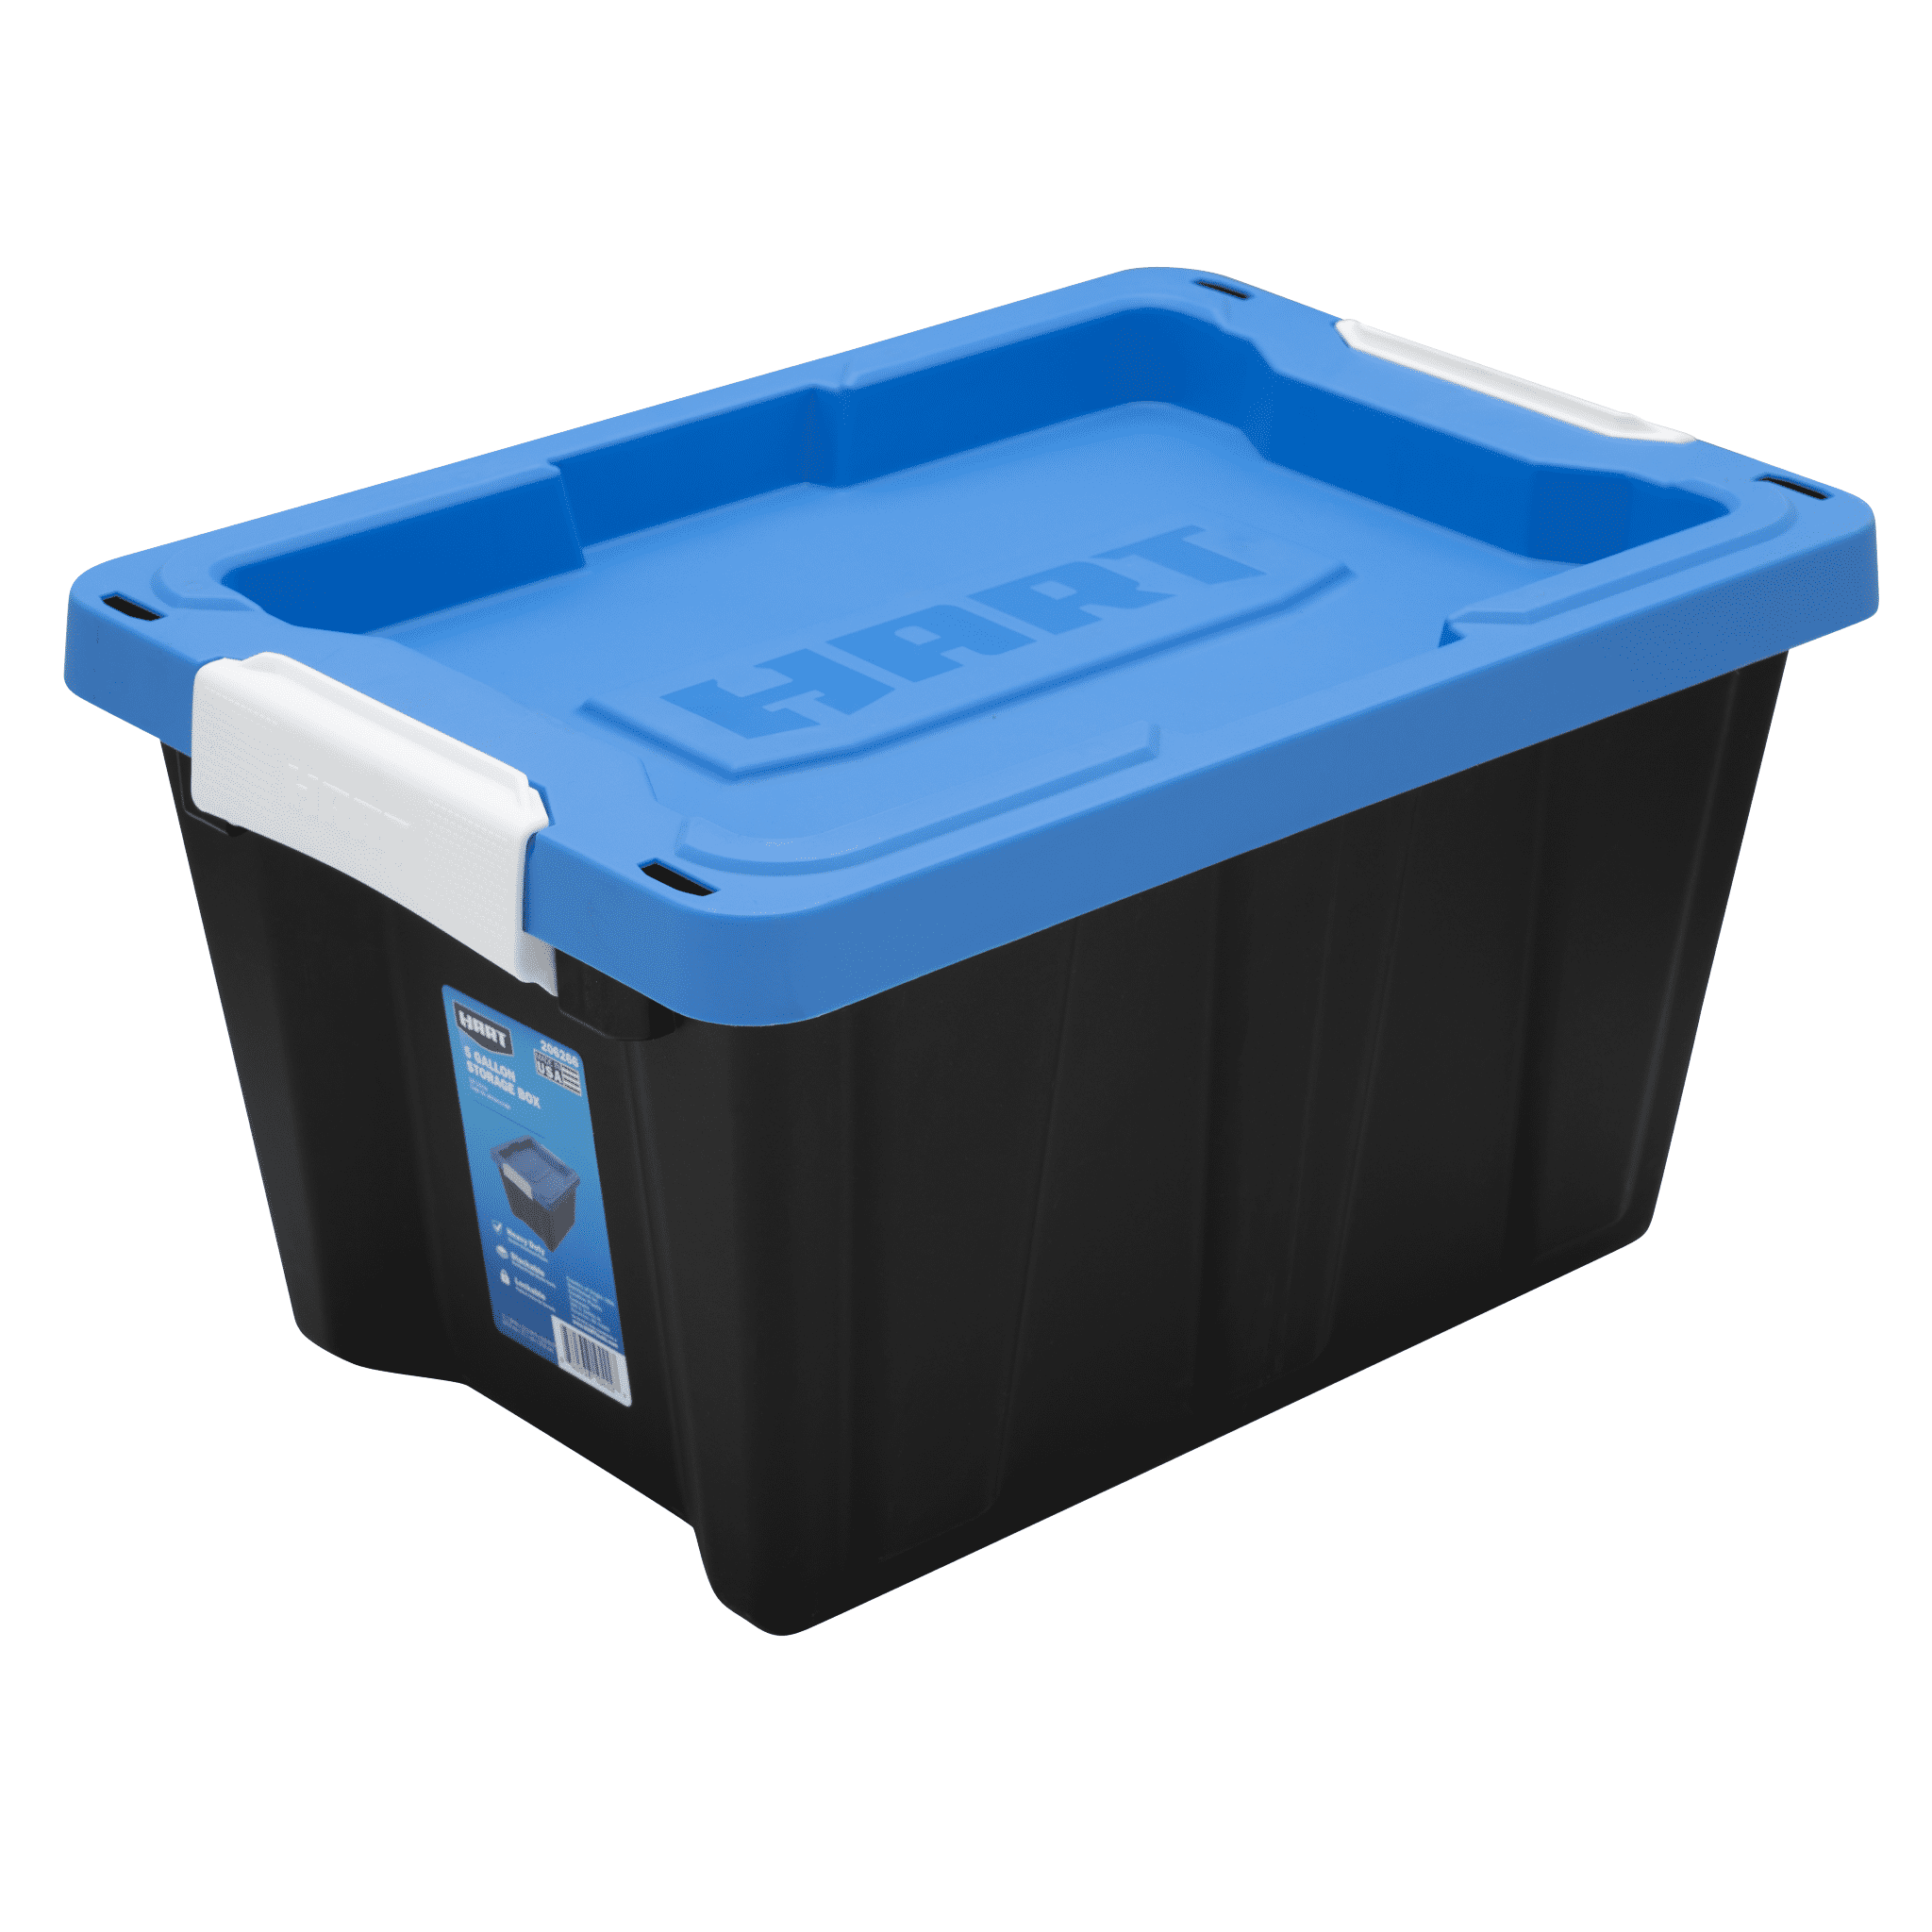 HART 5 Gallon Latching Plastic Storage Bin Container, Black with Blue Lid